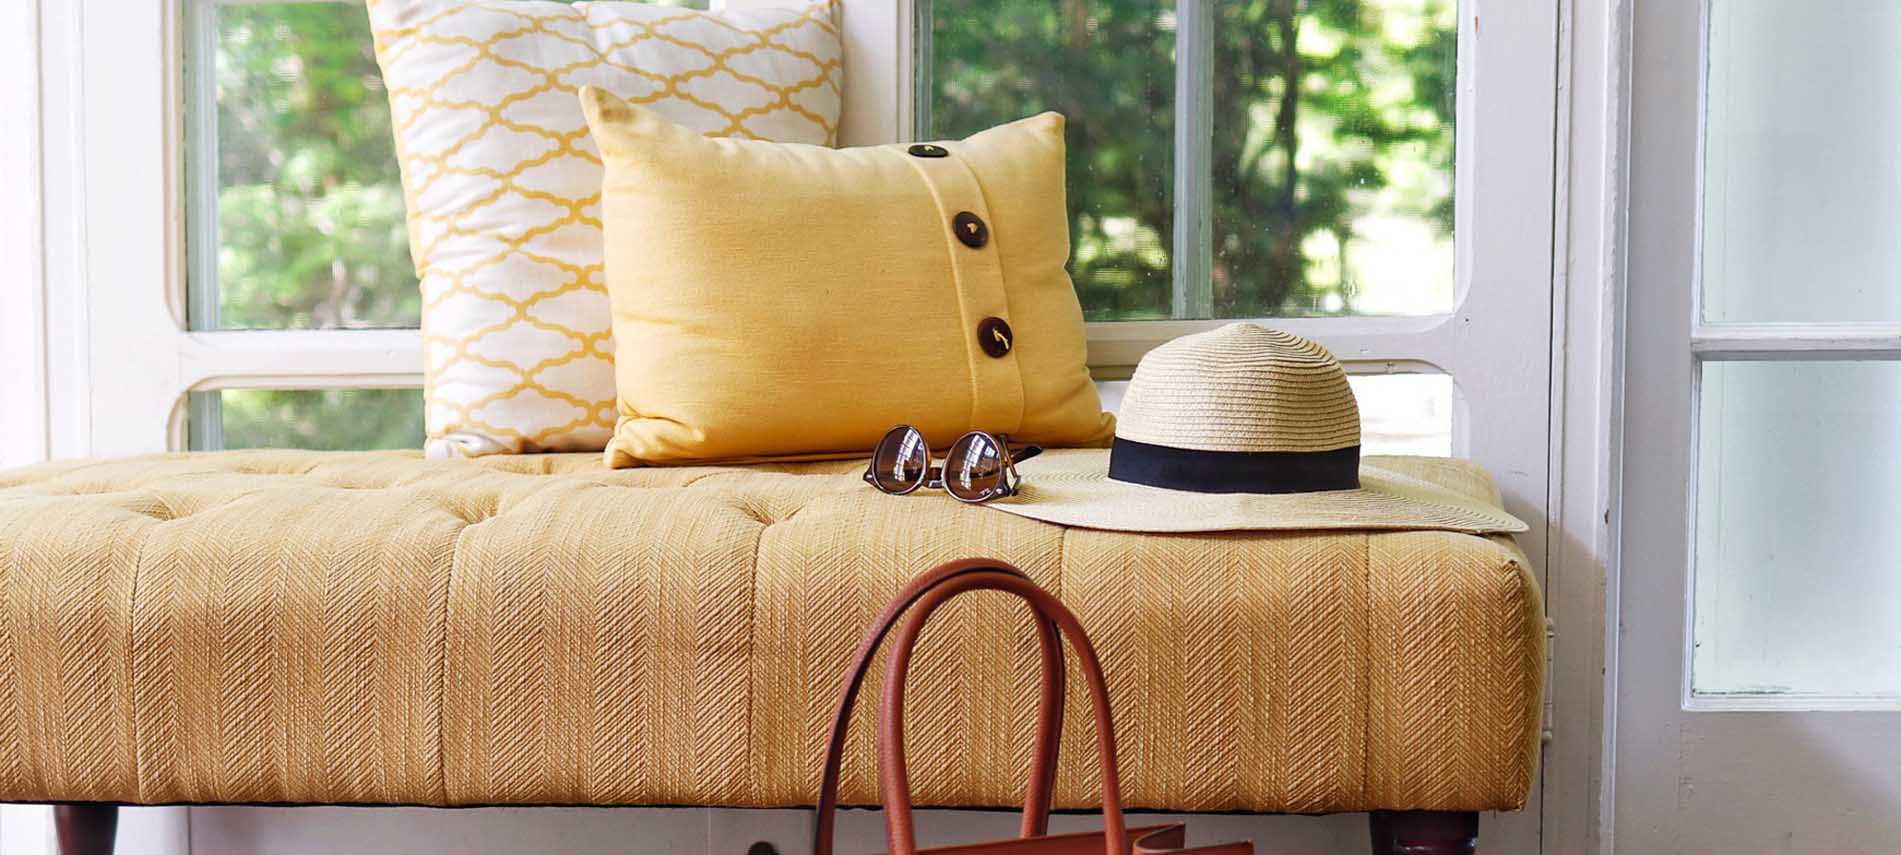 vignette of travel hat and sunglasses in sunroom